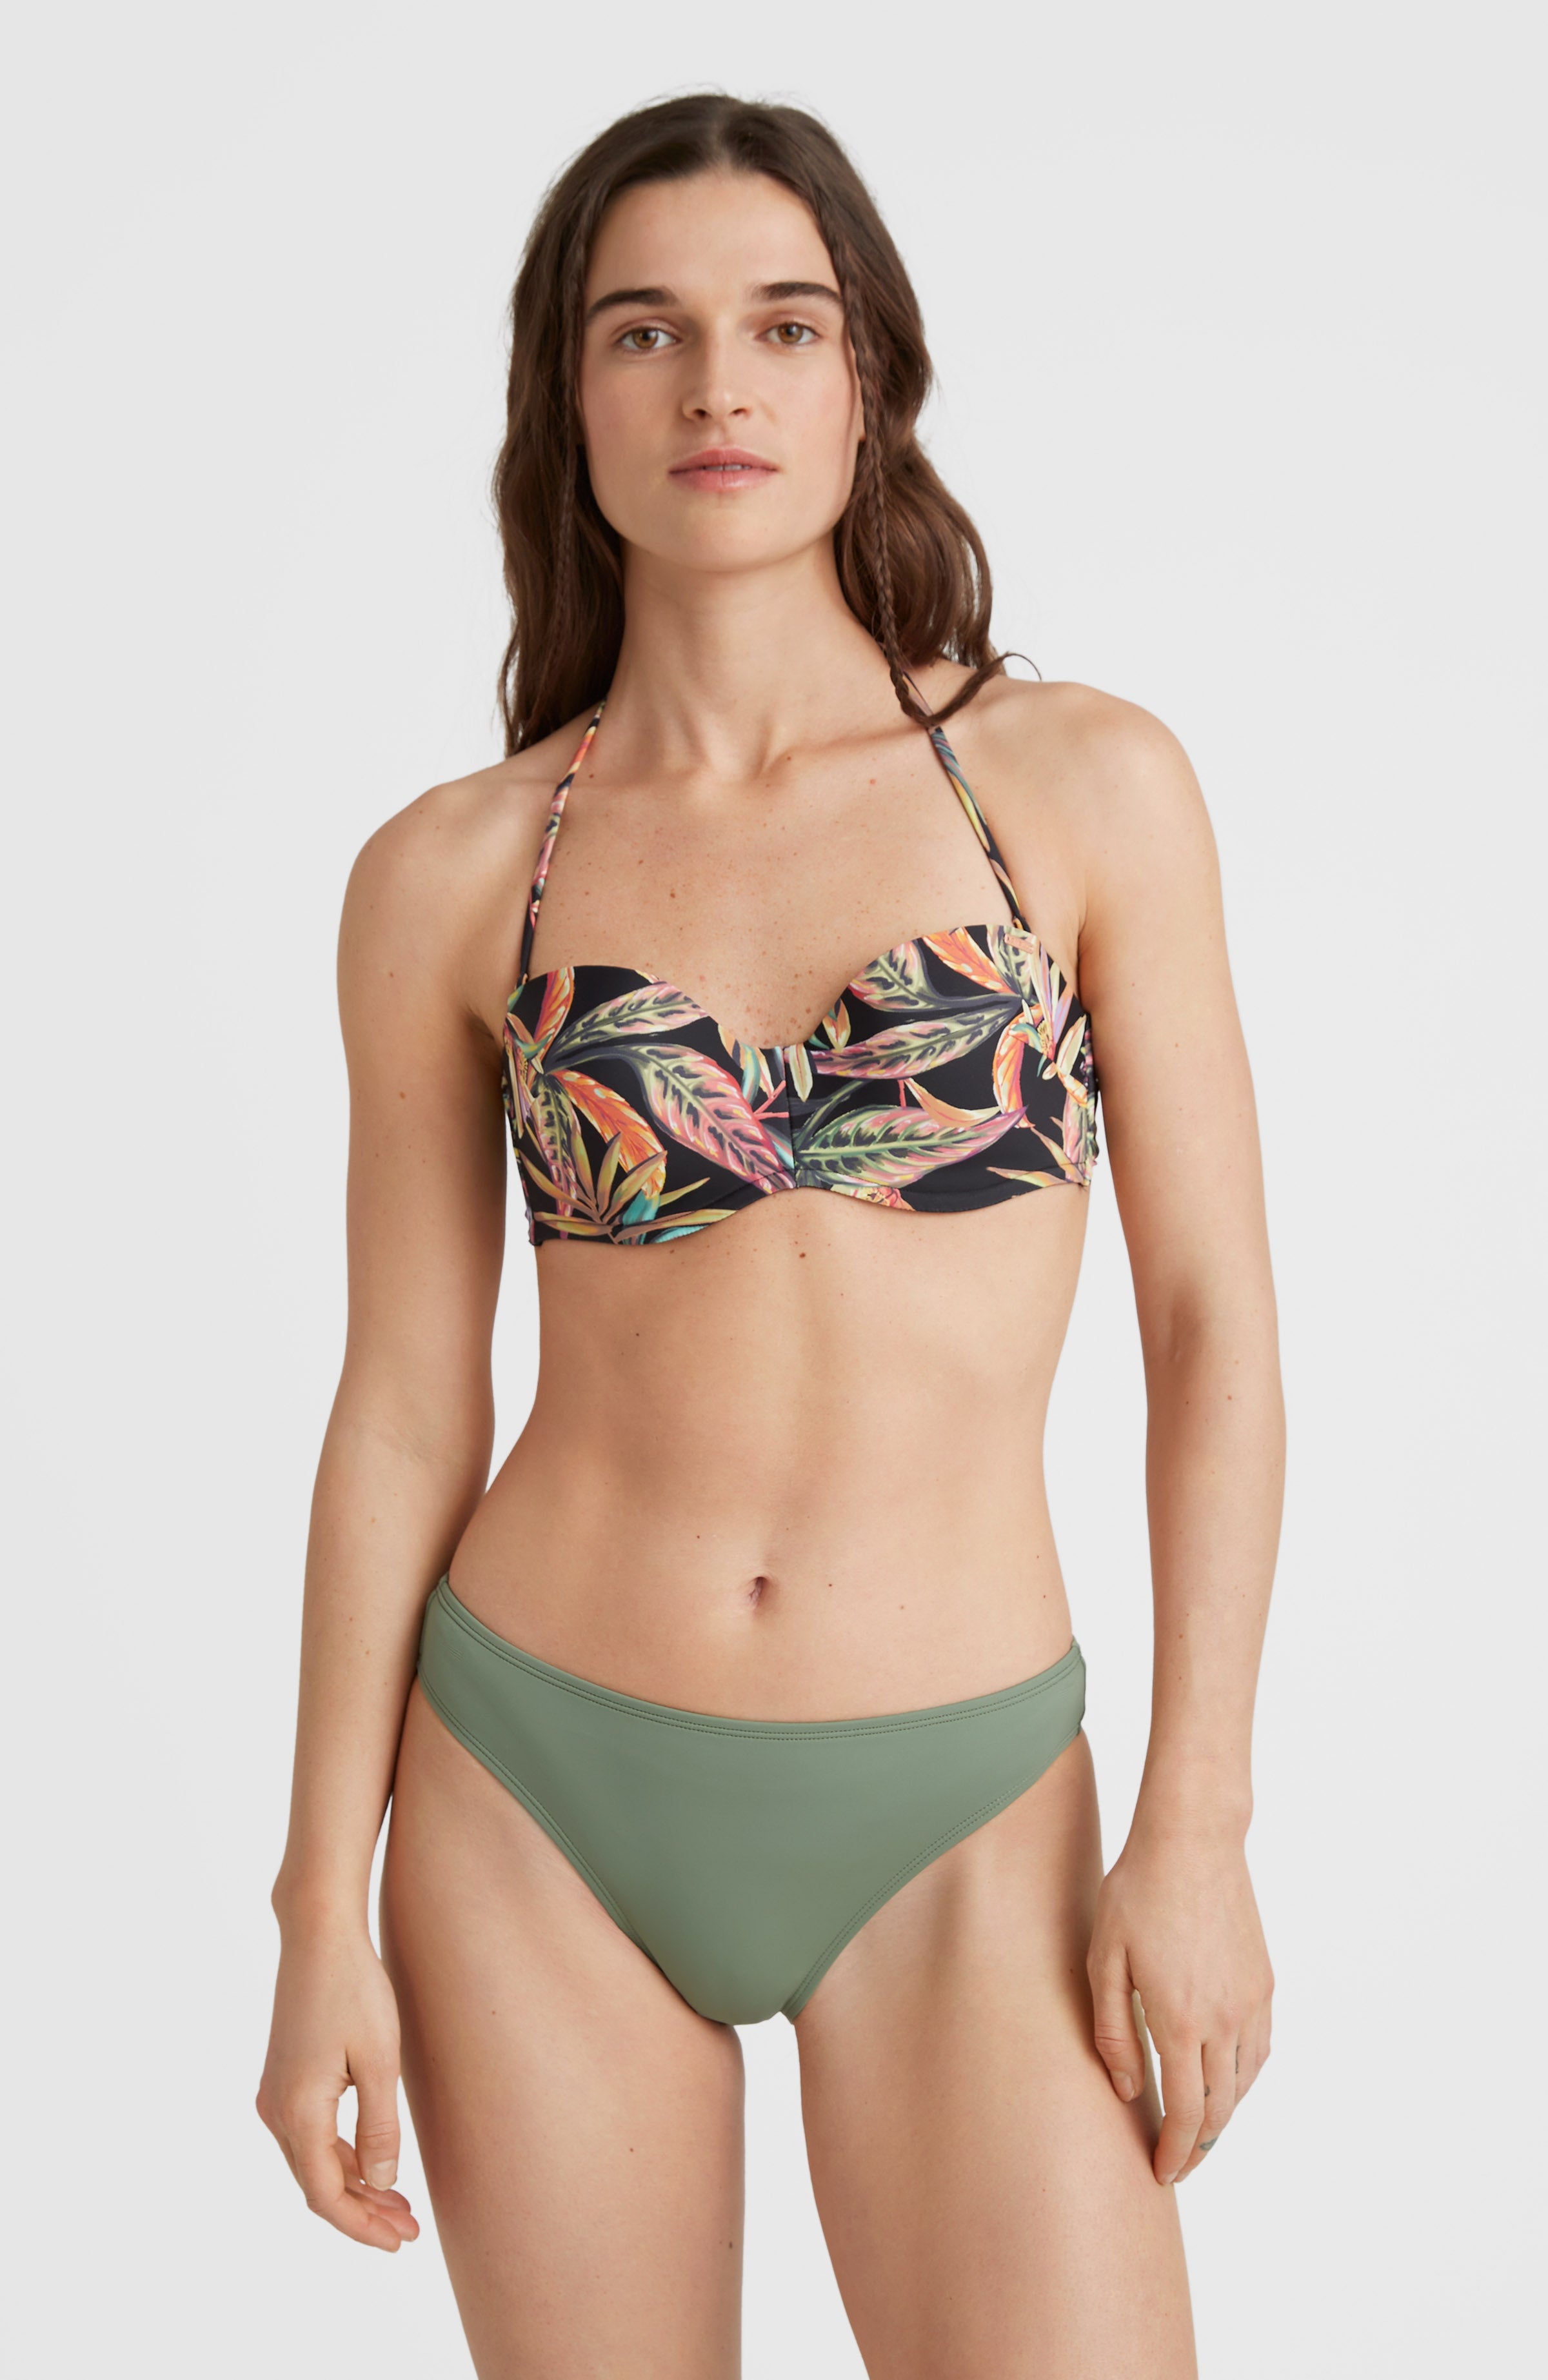 What are Brazilian briefs?  Briefs Fit and Style Guide by Marlies Dekkers